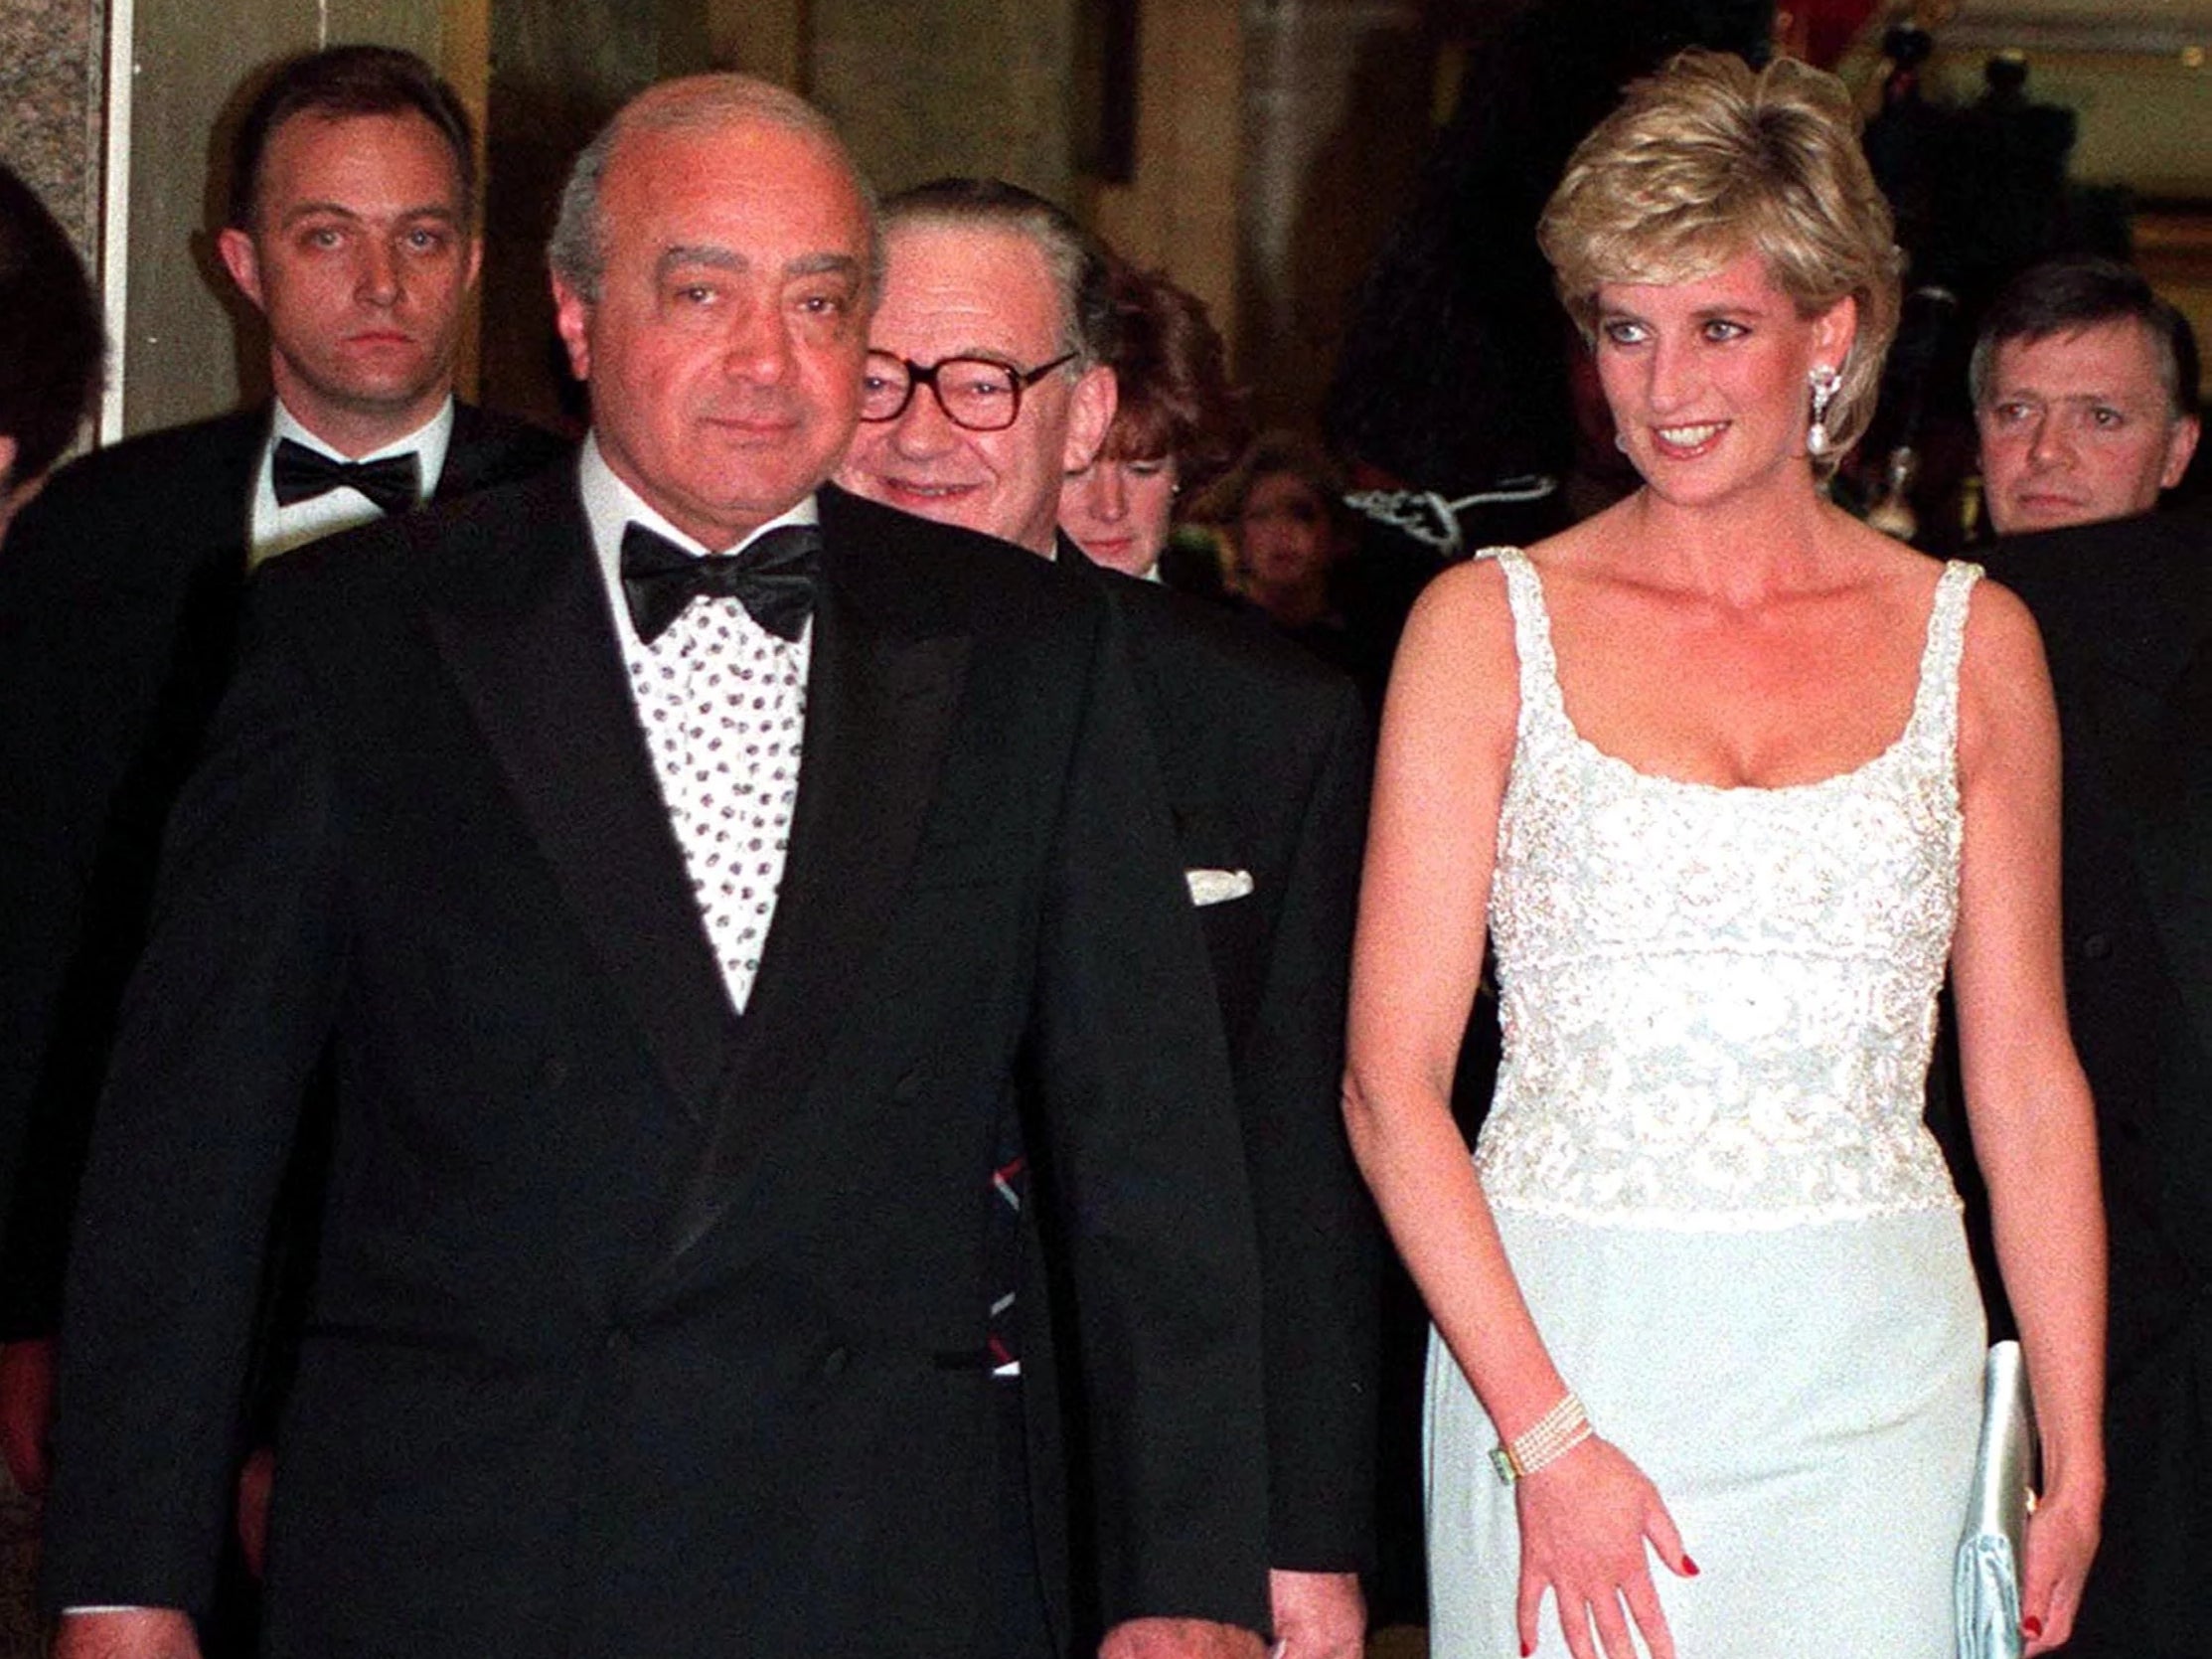 Mohamed Al Fayed Dies Aged 94. Princess Diana with Mohammed Al Fayed attending a charity dinner for the Harefield Heart Unit held at Harrods, London, February 1996